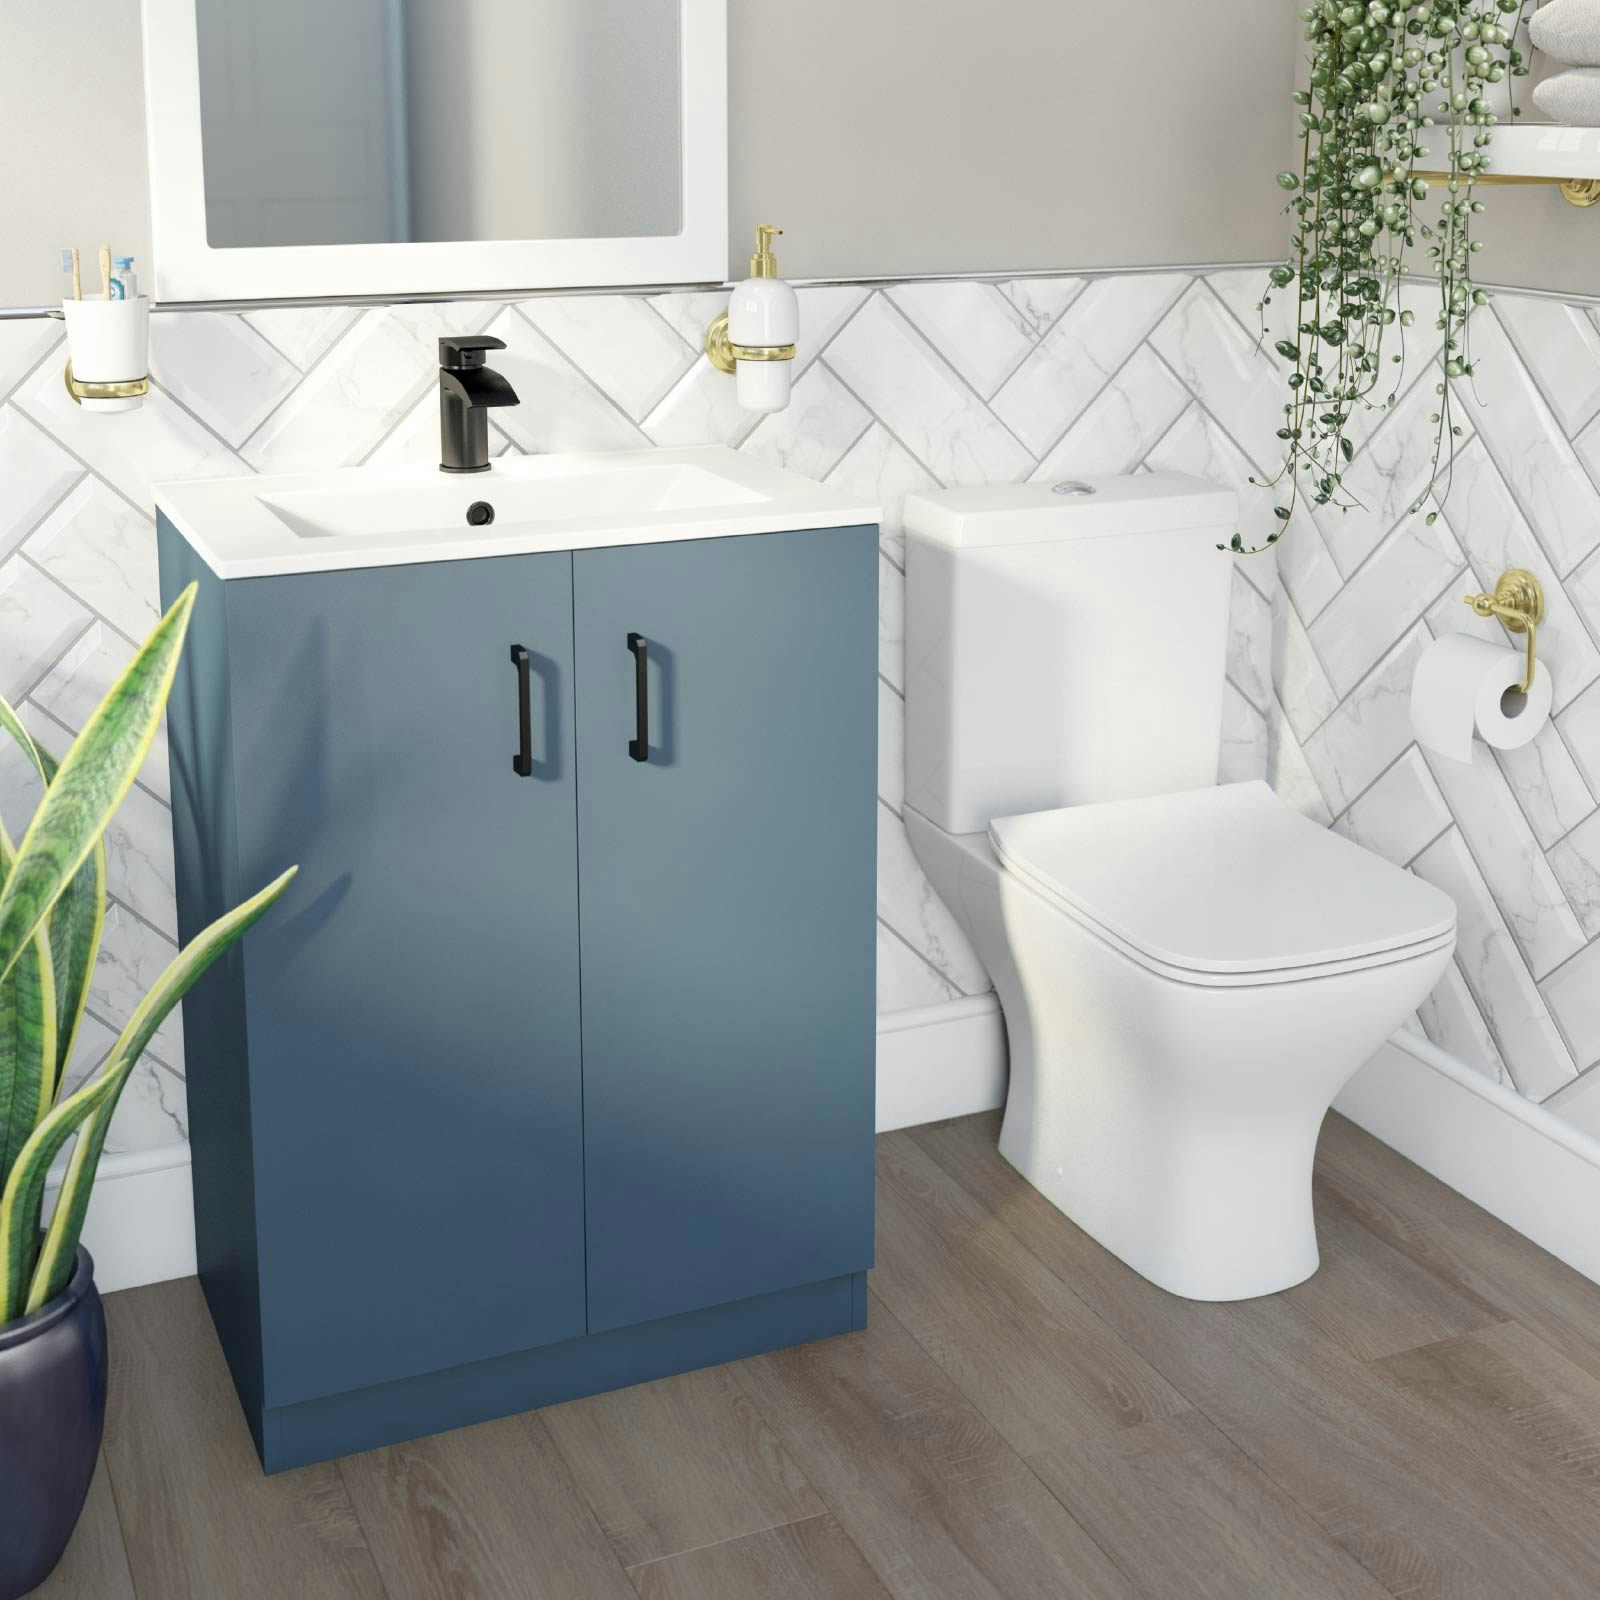 Update your space with colourful bathroom furniture